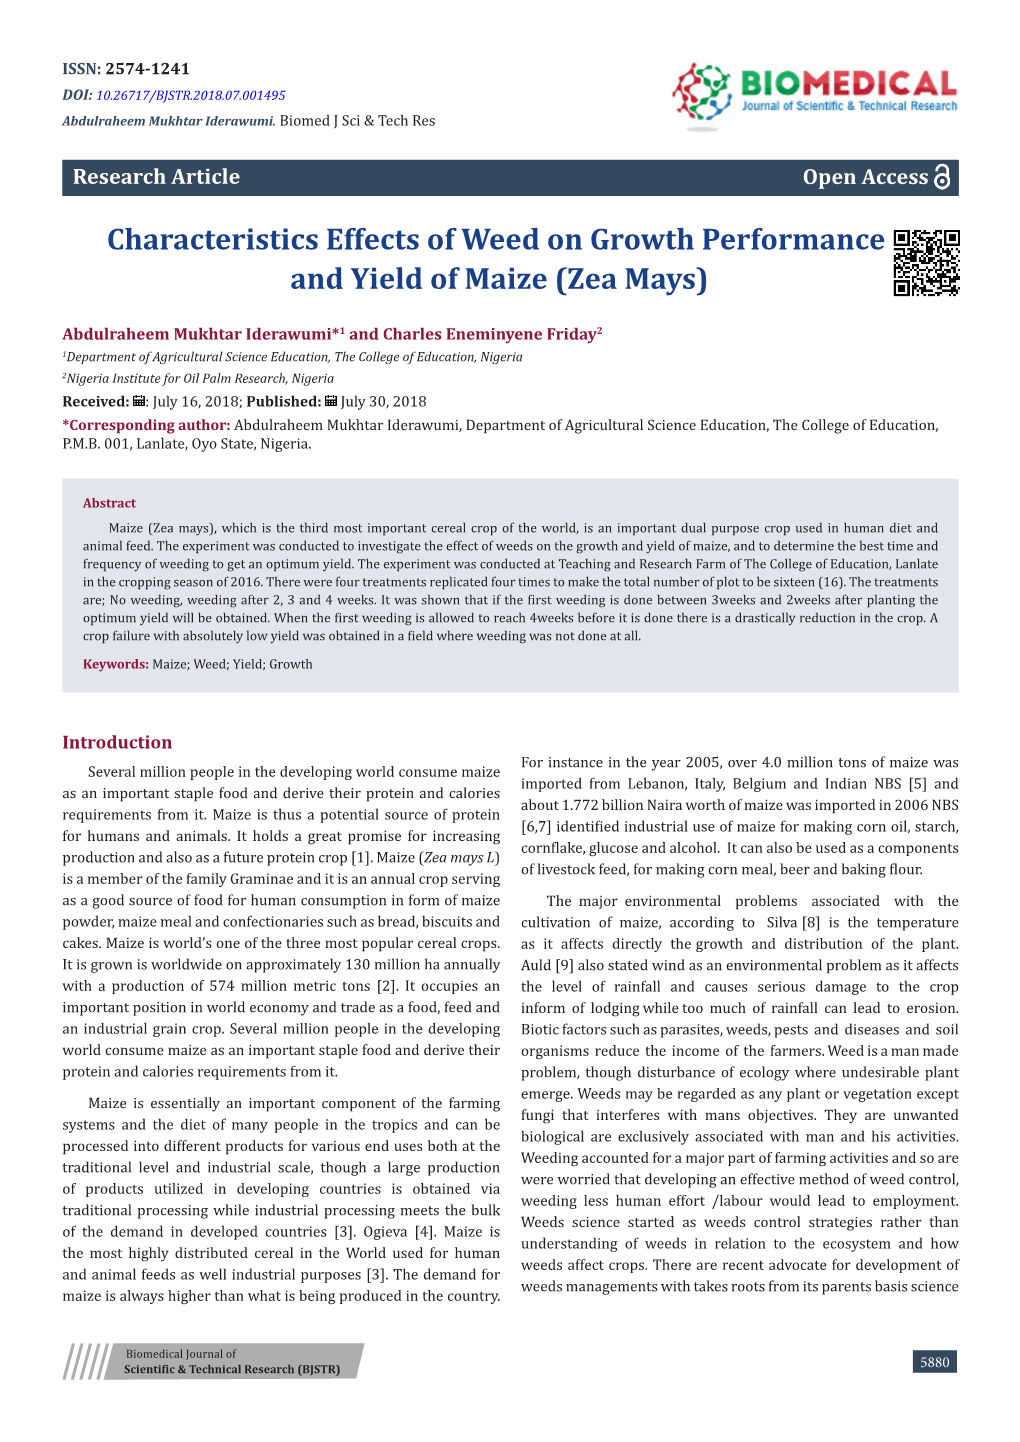 Characteristics Effects of Weed on Growth Performance and Yield of Maize (Zea Mays)